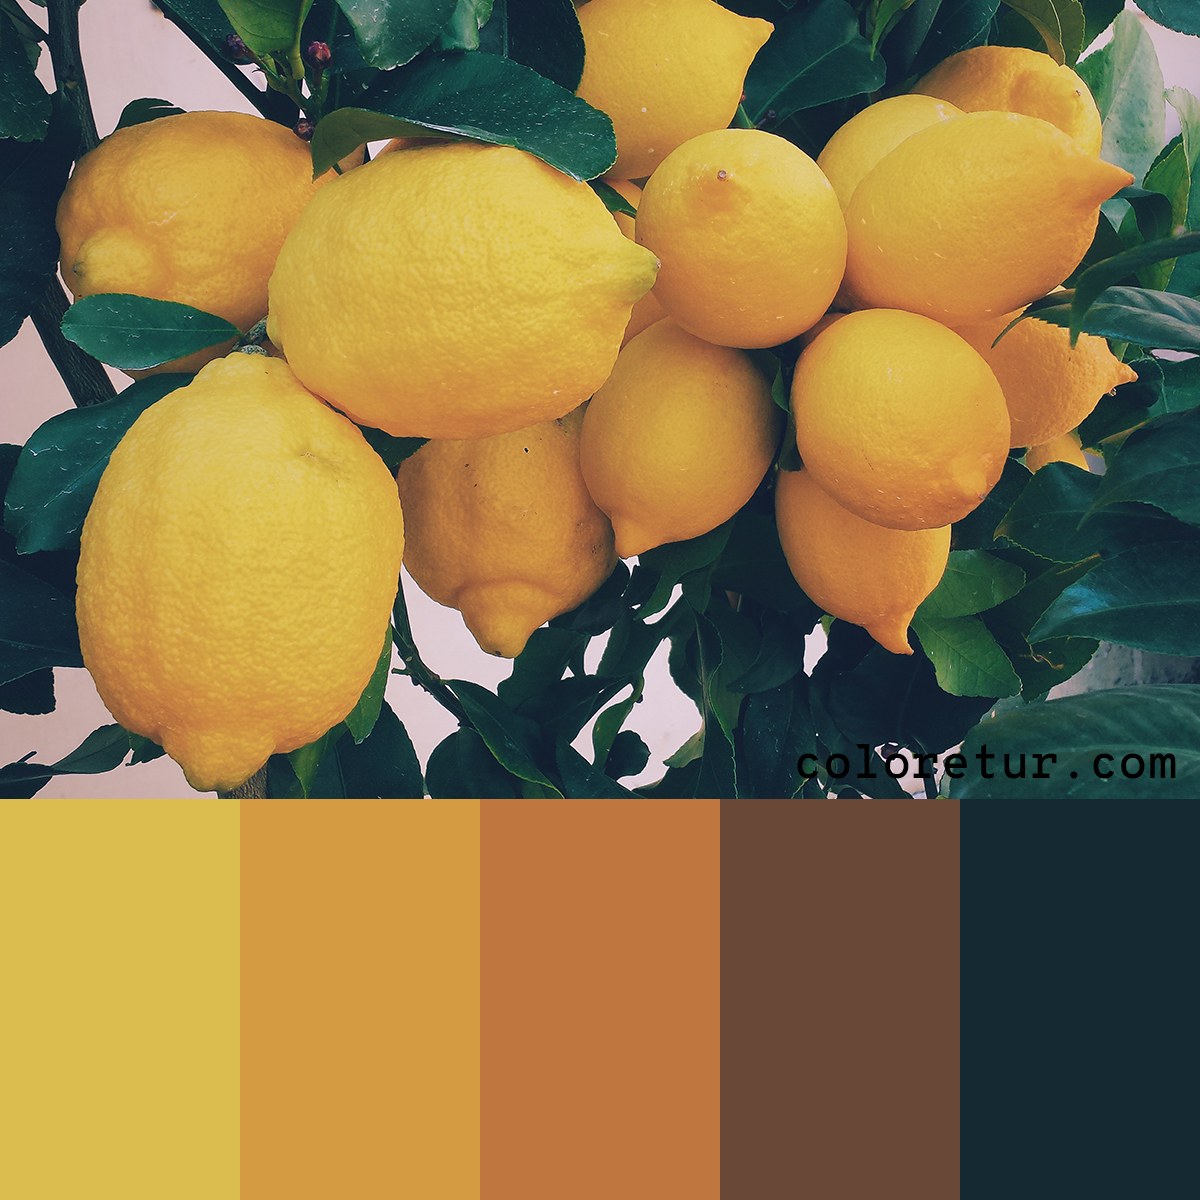 A palette from a bunch of lemons